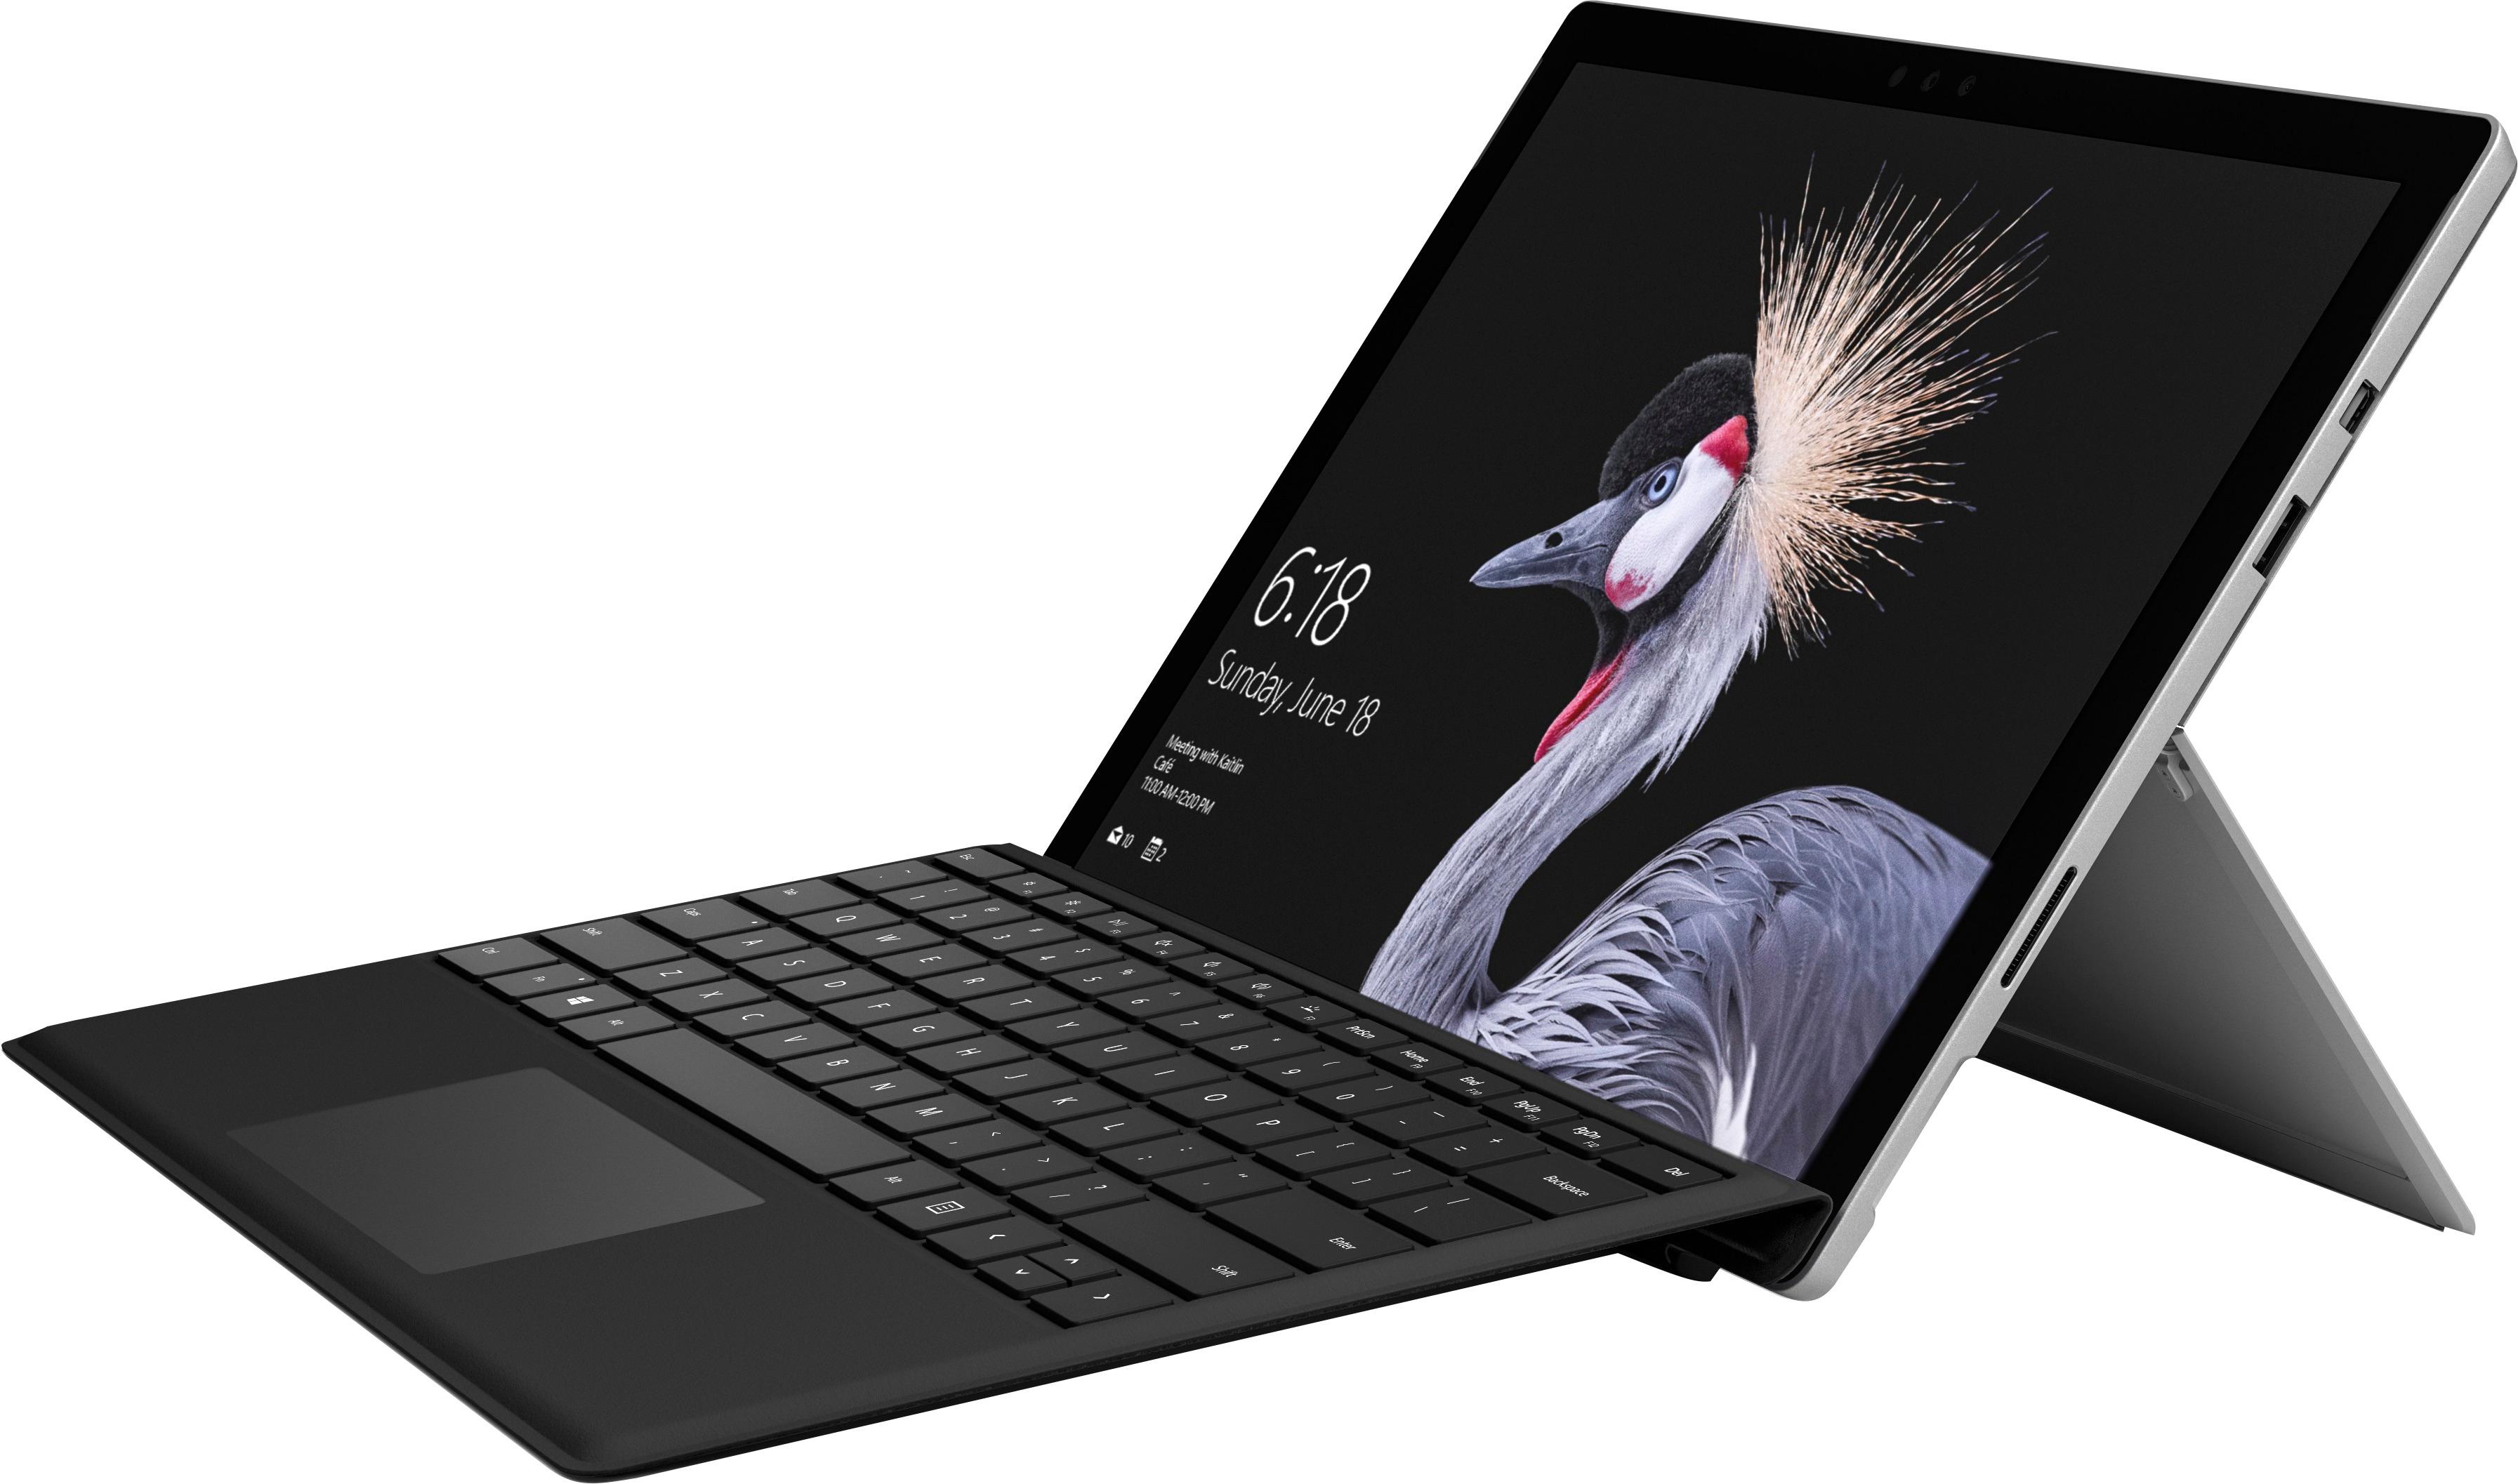 Microsoft Surface Pro 7, 12.3 Touch-Screen, Intel Core i5-1035G4, 8GB  Memory, 128GB SSD, Iris Plus Graphics, Windows 10 Home, Platinum with Black  Type Cover, QWU-00001 